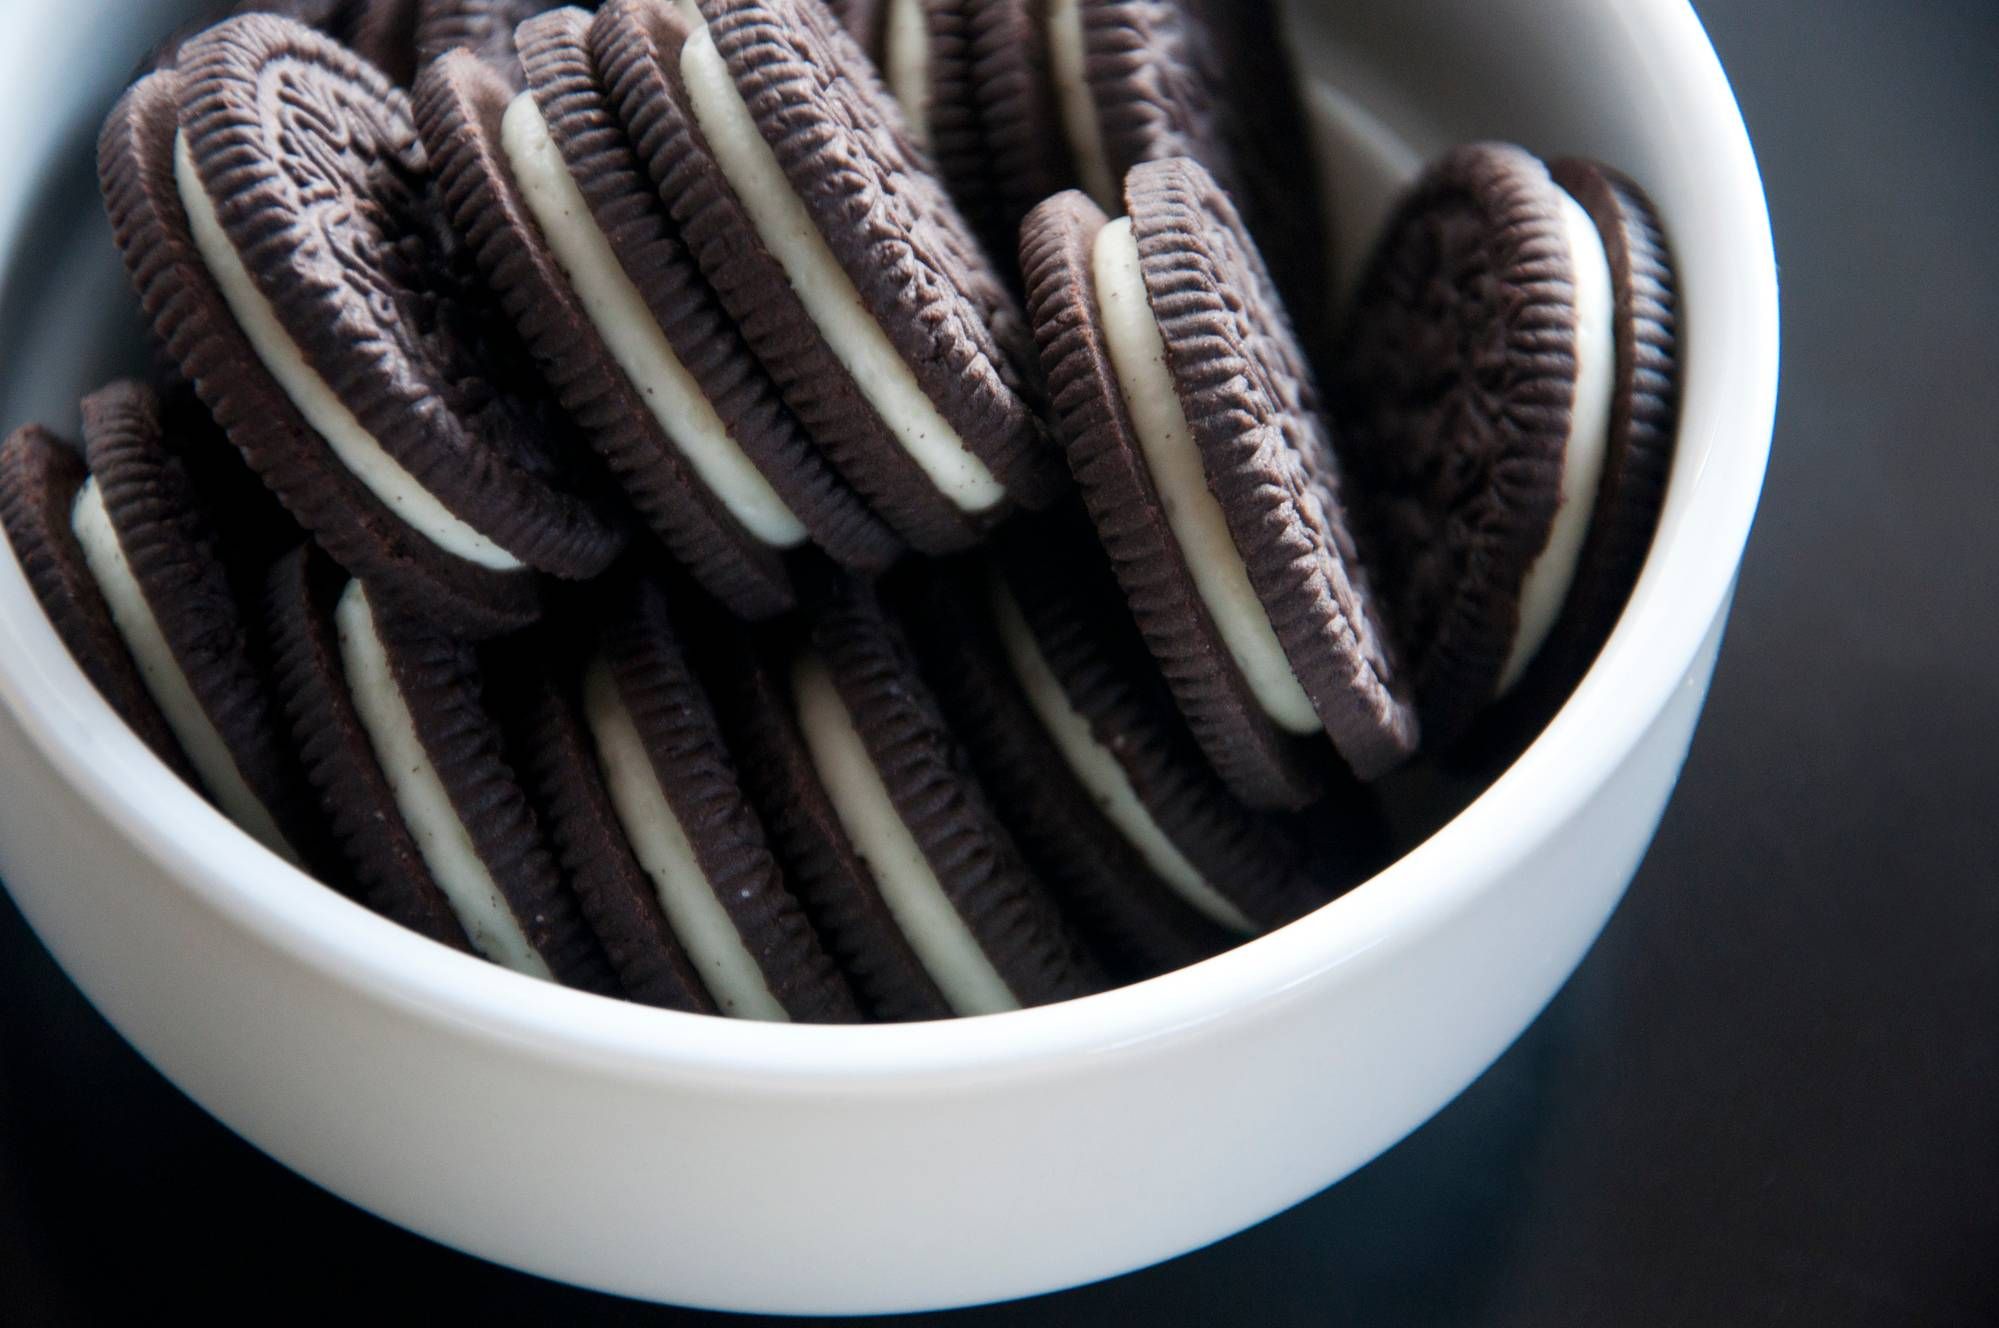 A federal judge has dismissed a class action alleging that Oreo cookies are misleadingly marketed.